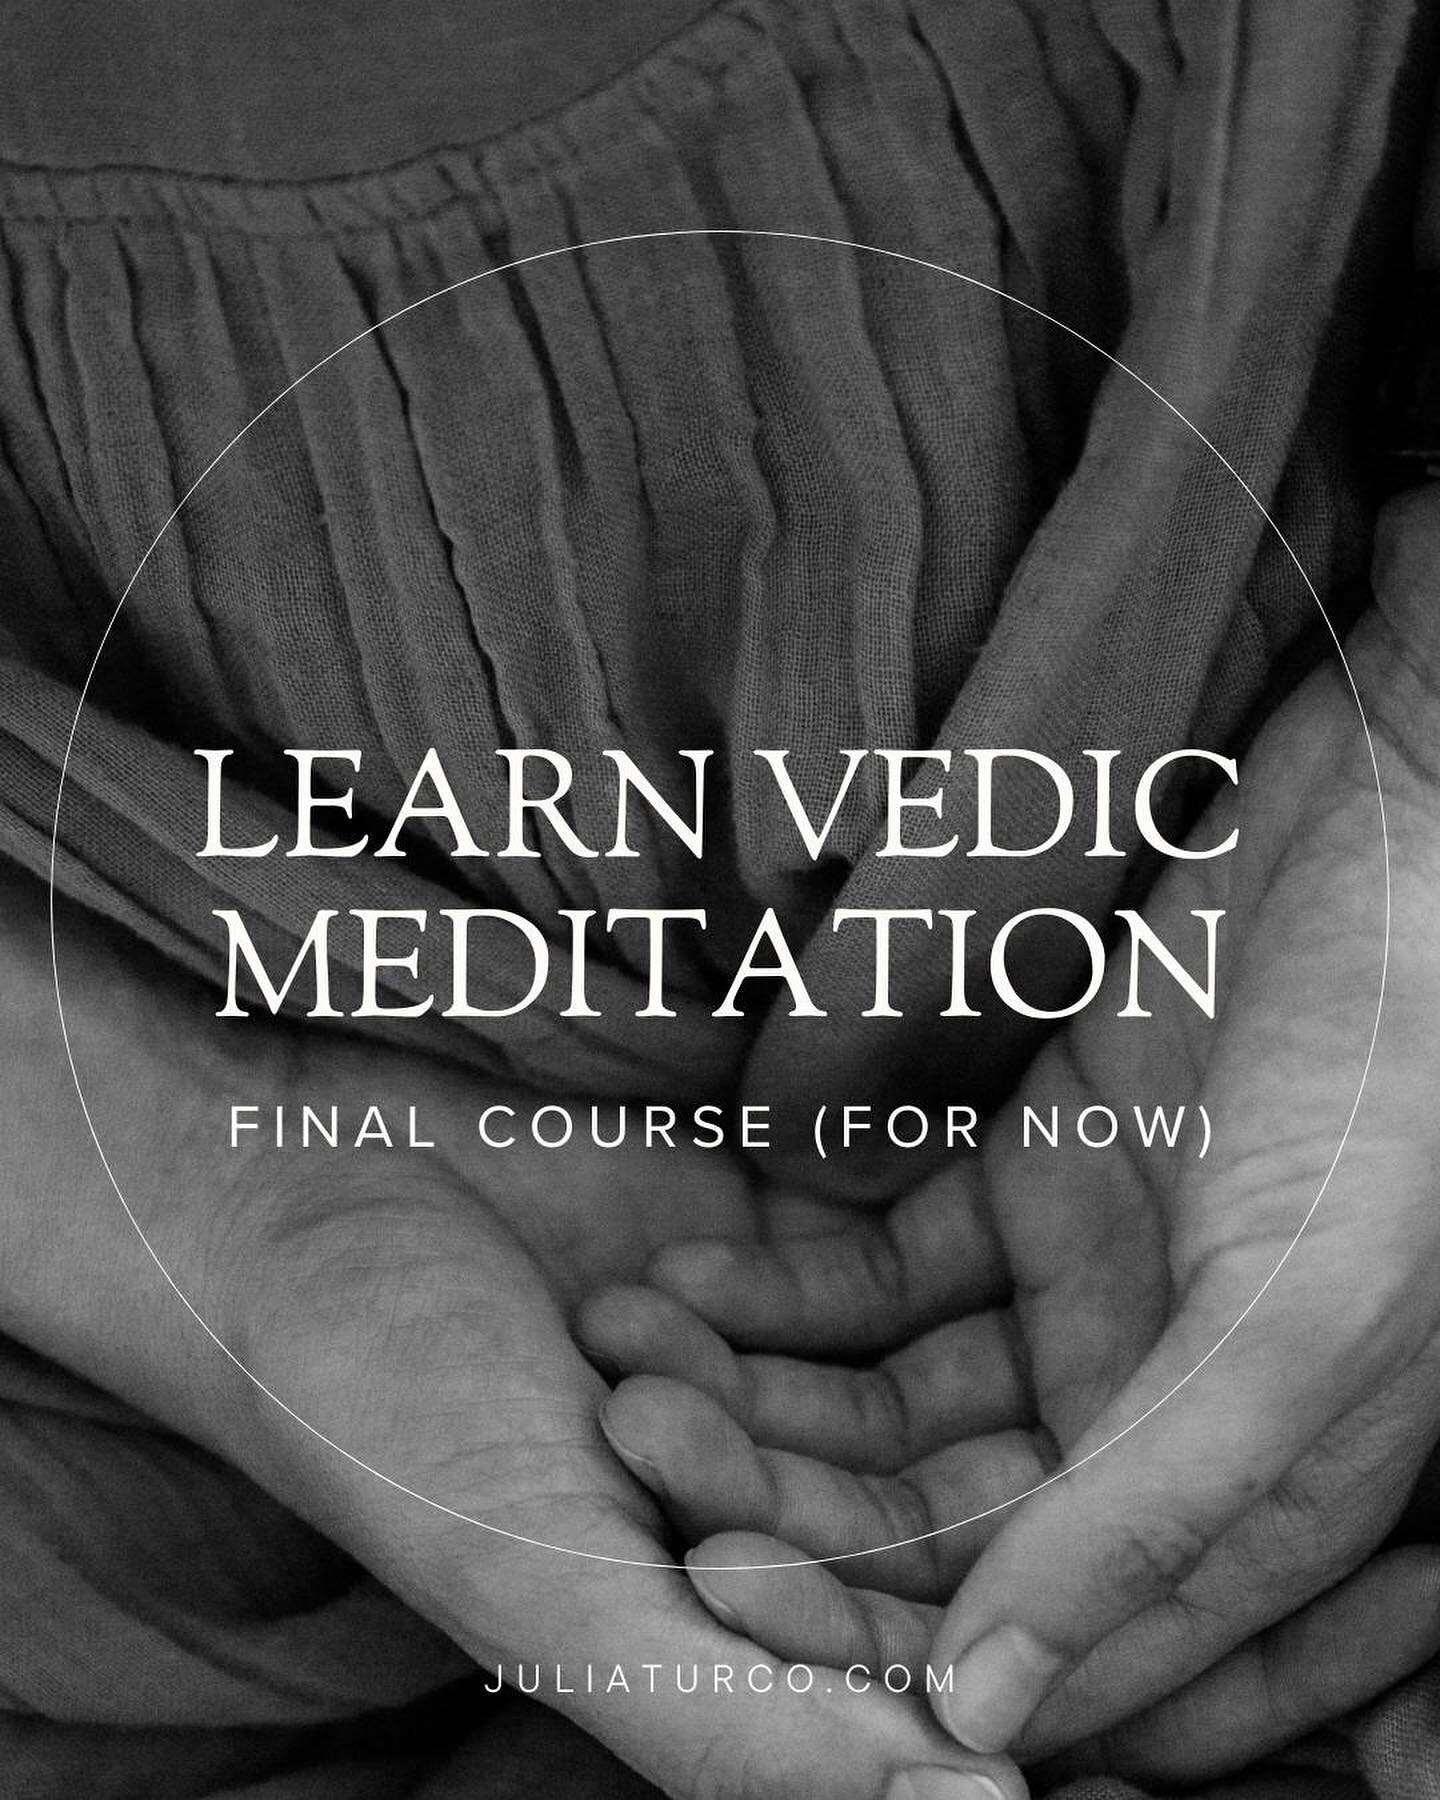 A few more Vedic meditation offerings left before I begin to cocoon in anticipation of the arrival of our baby earth side. Feels both surreal and exciting!

If you&rsquo;re keen to learn the effortless art of Vedic meditation, my final course is the 